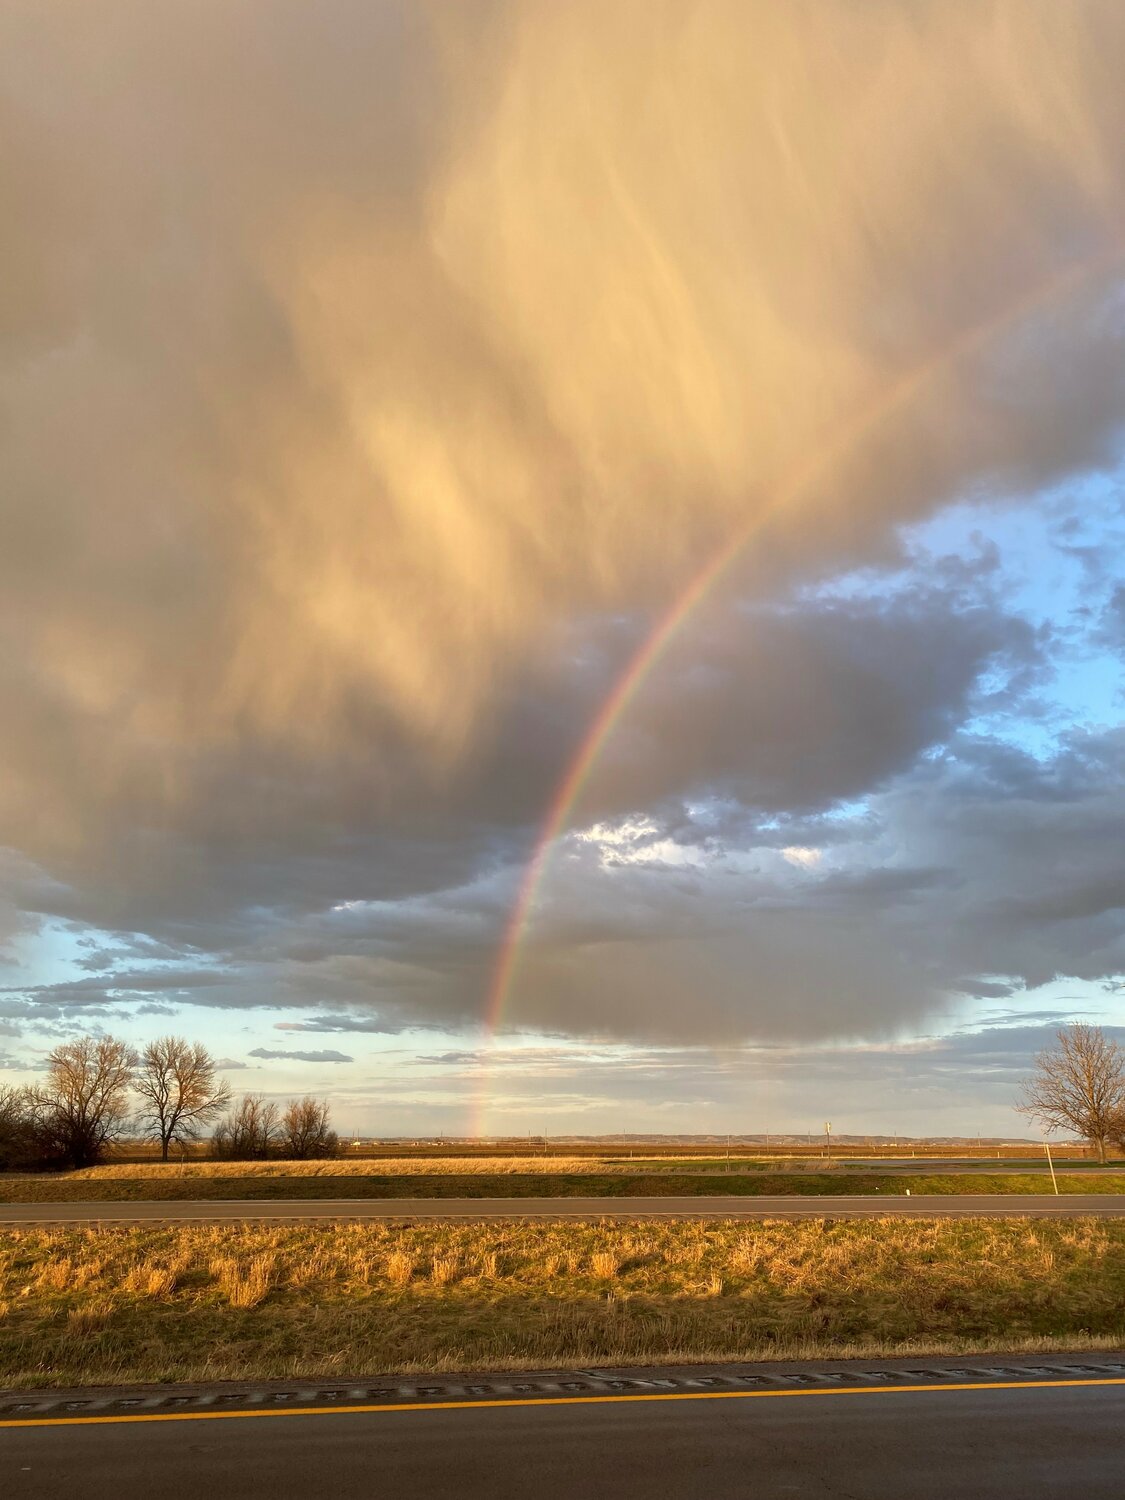 Northwest Iowa saw several severe storm move through the area last week. This rainbow appeared just south of Salix, IA.